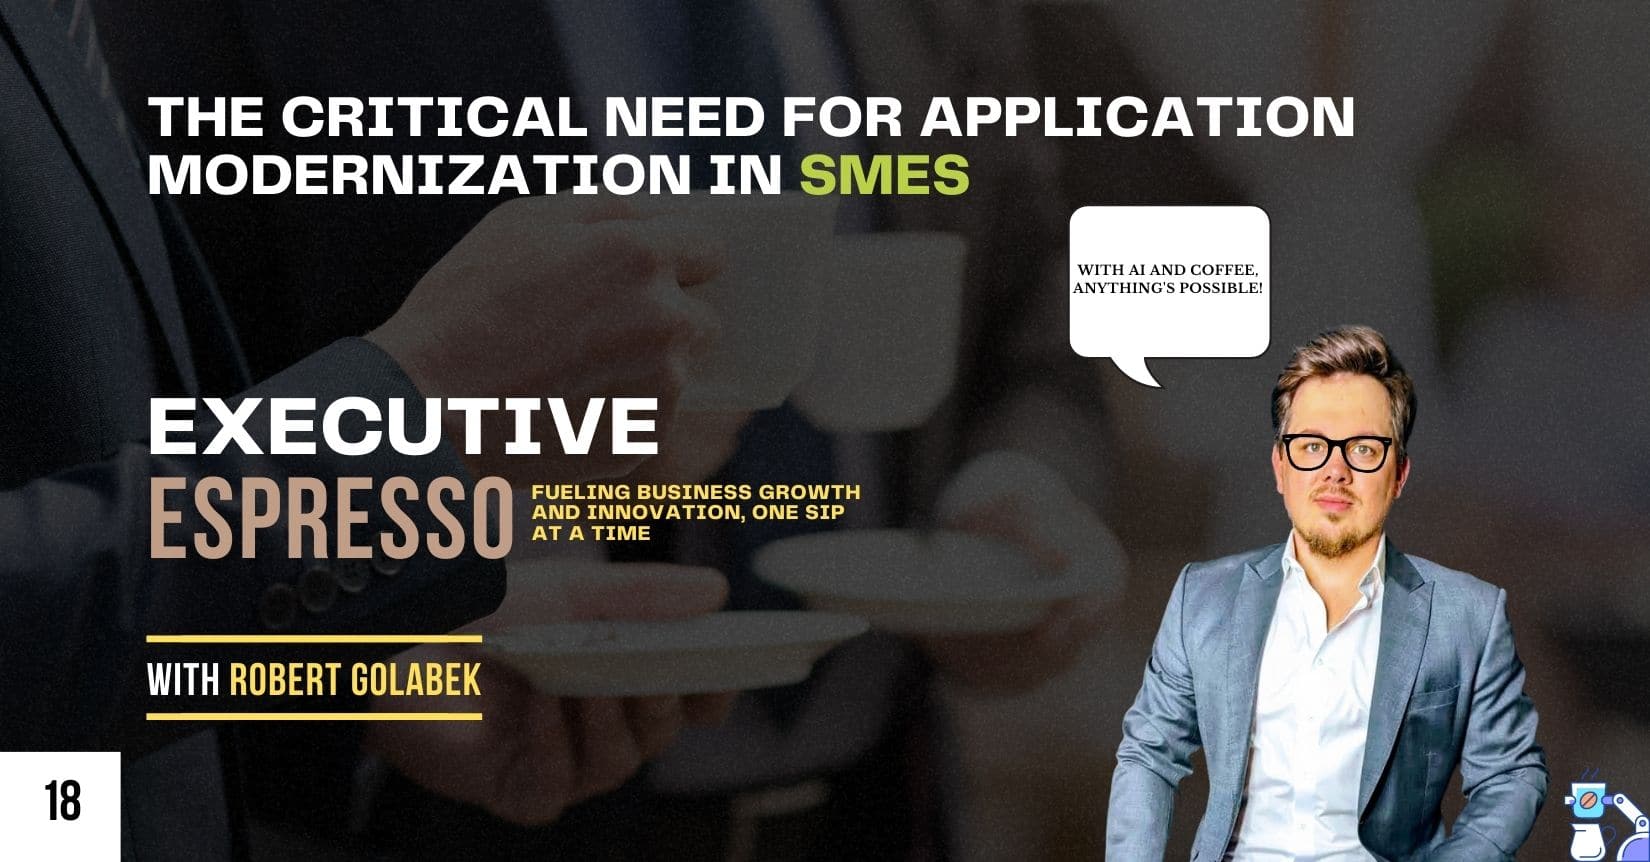 The Critical Need for Application Modernization in SMEs